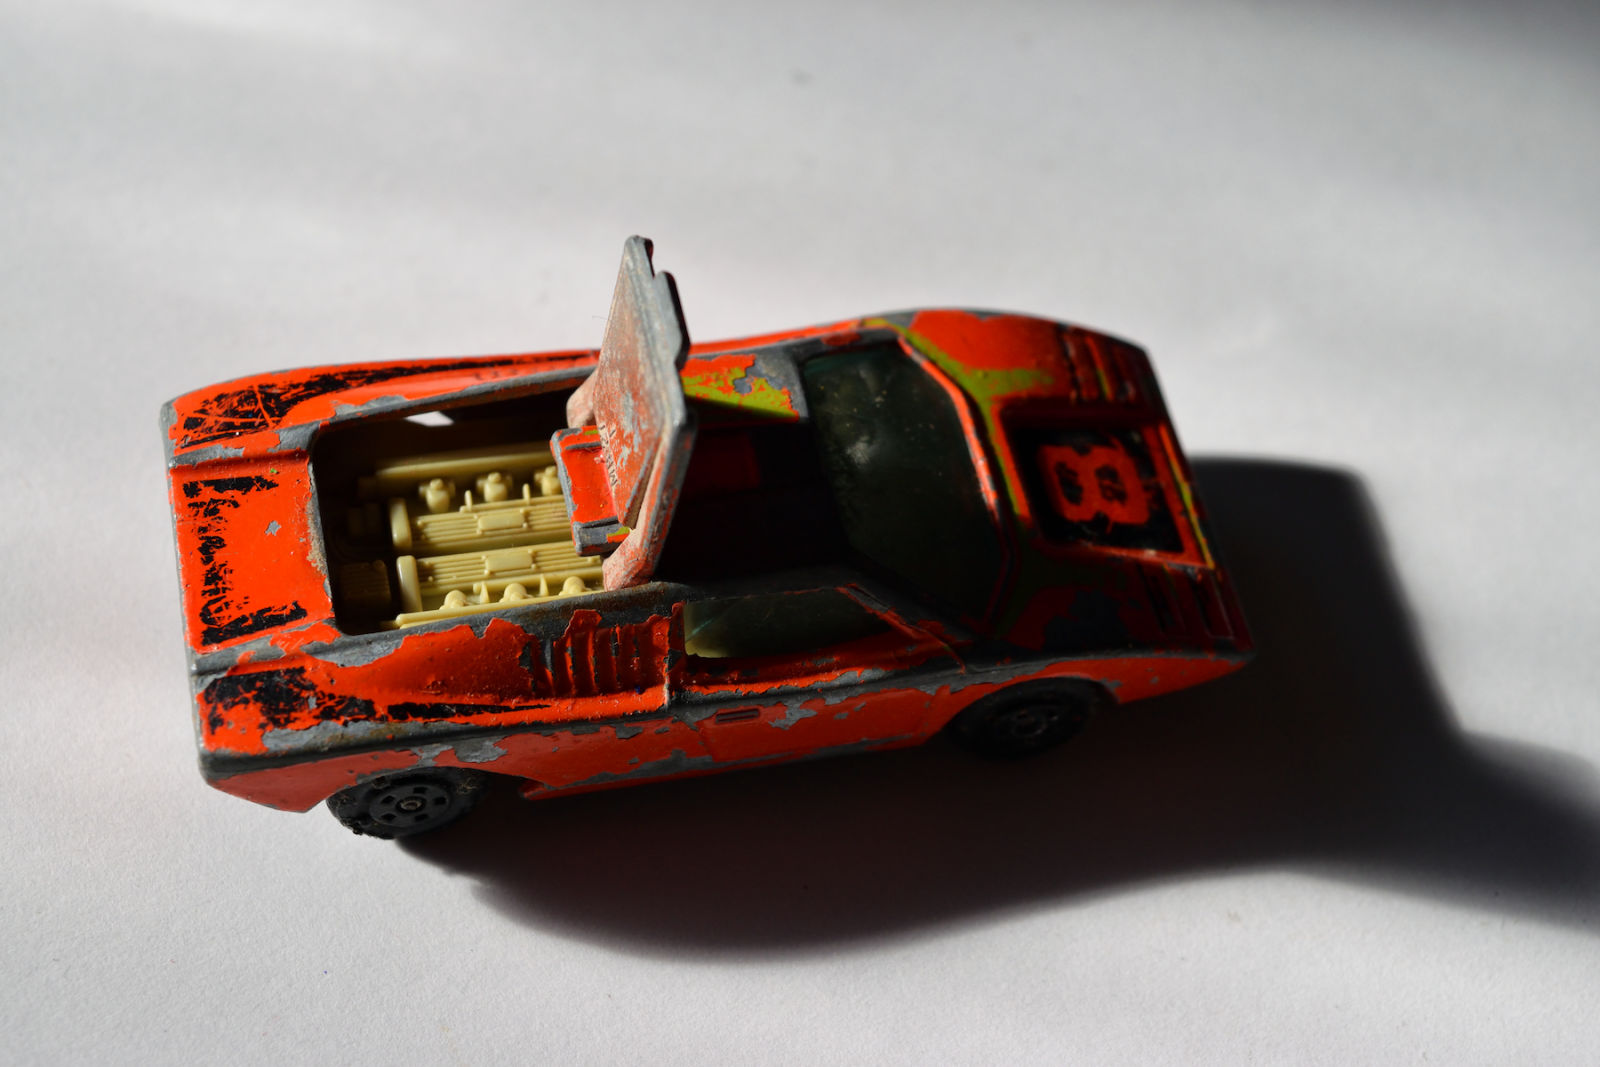 Illustration for article titled Found my old hotwheels/matchbox cars